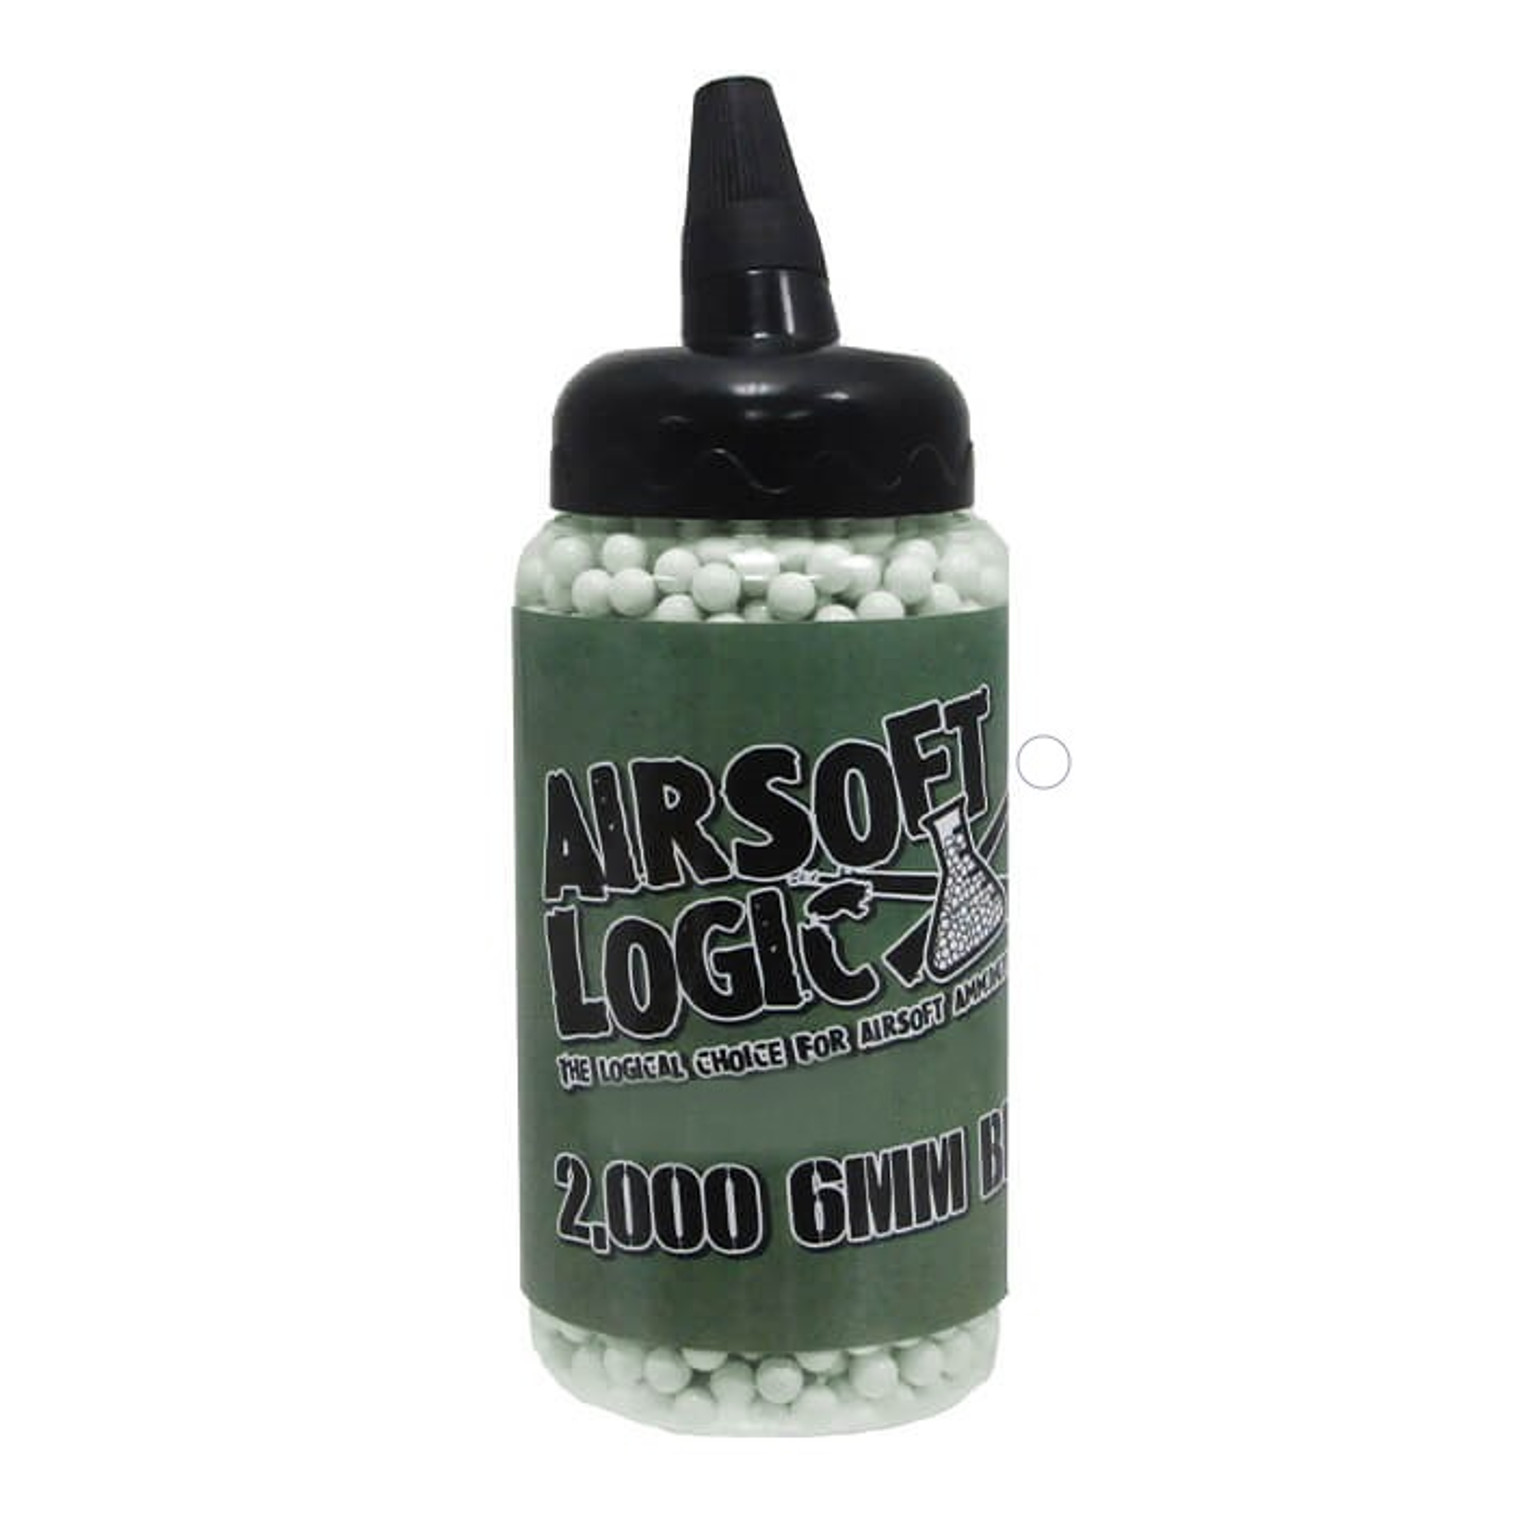 Airsoft Logic 0.25G TRACER BB (2000CT Bottle) Green